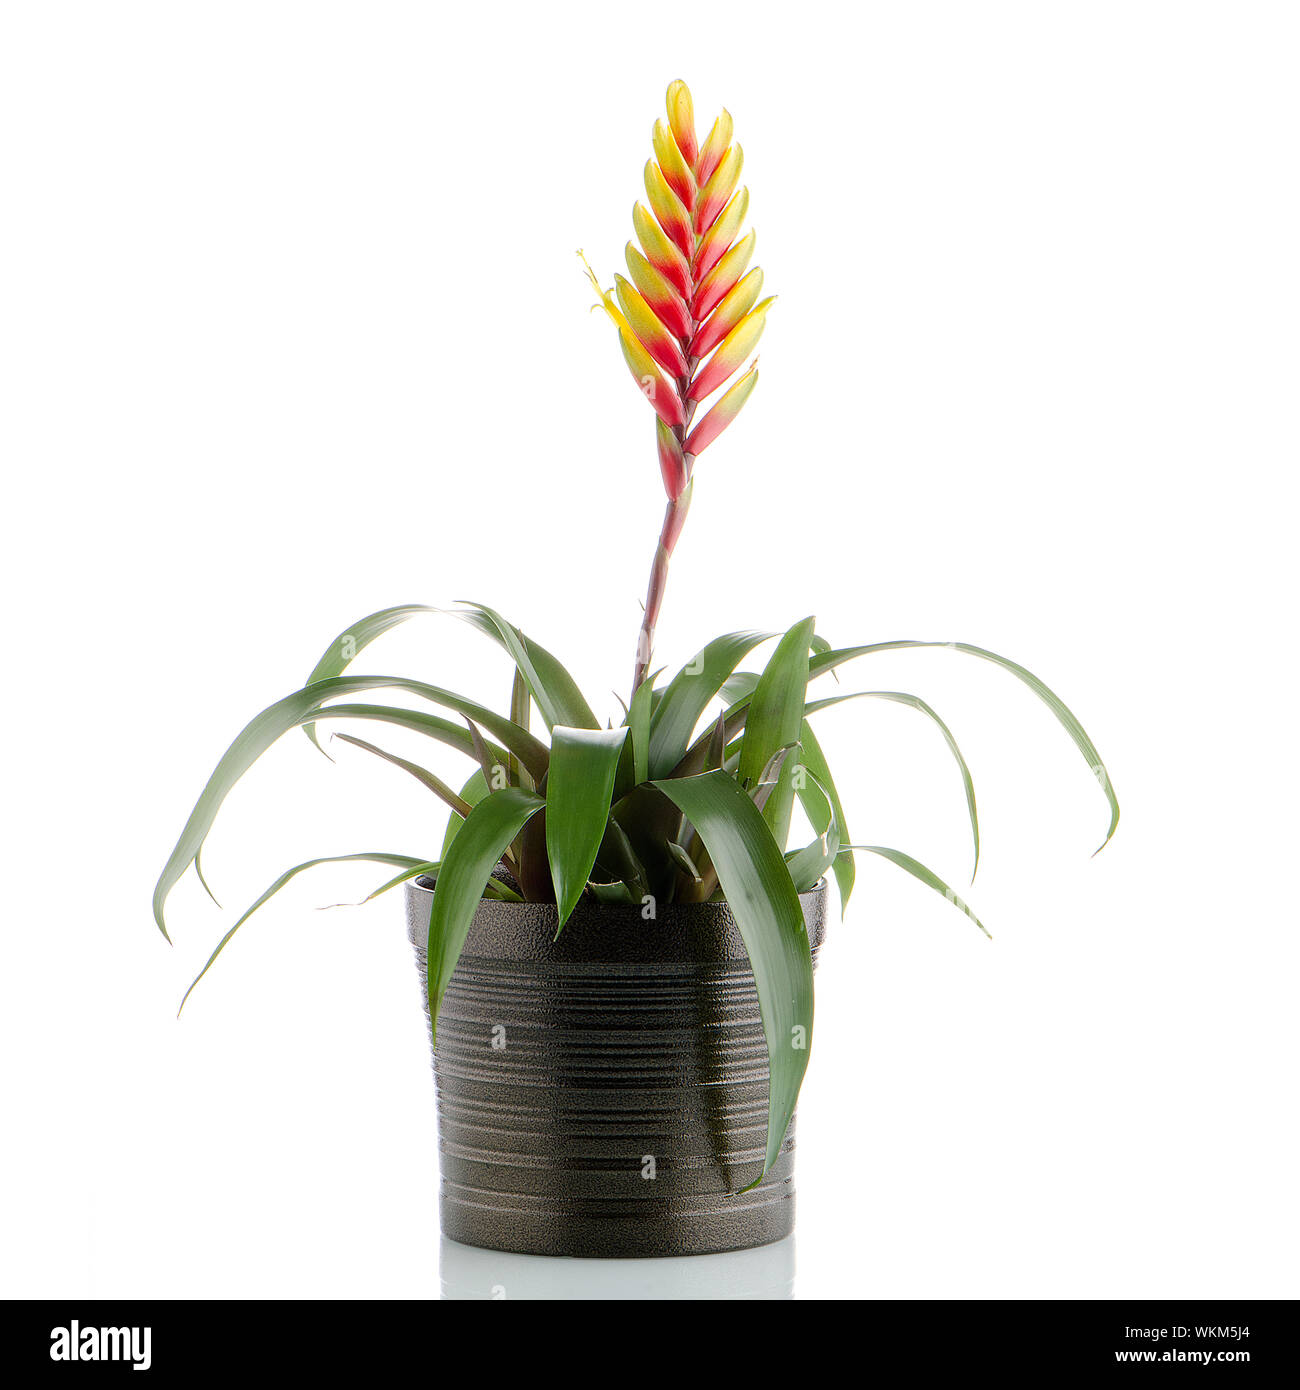 Yellow and red bromelia Flower on white background. Stock Photo